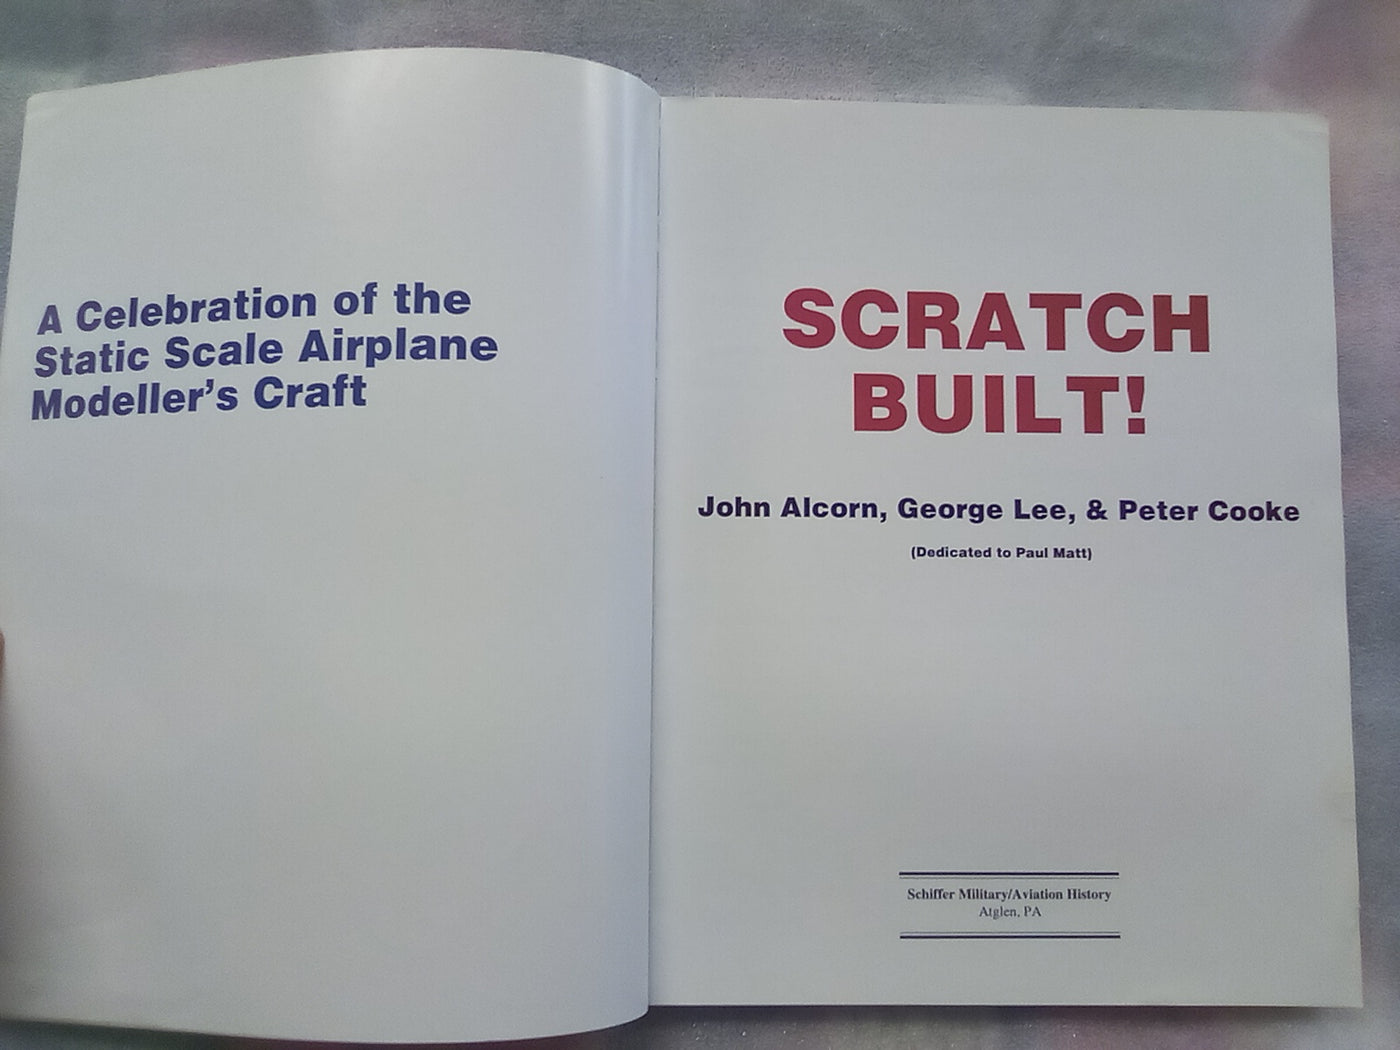 Scratch Built - A Celebration of the Static Scale Airplane Modeler's Craft